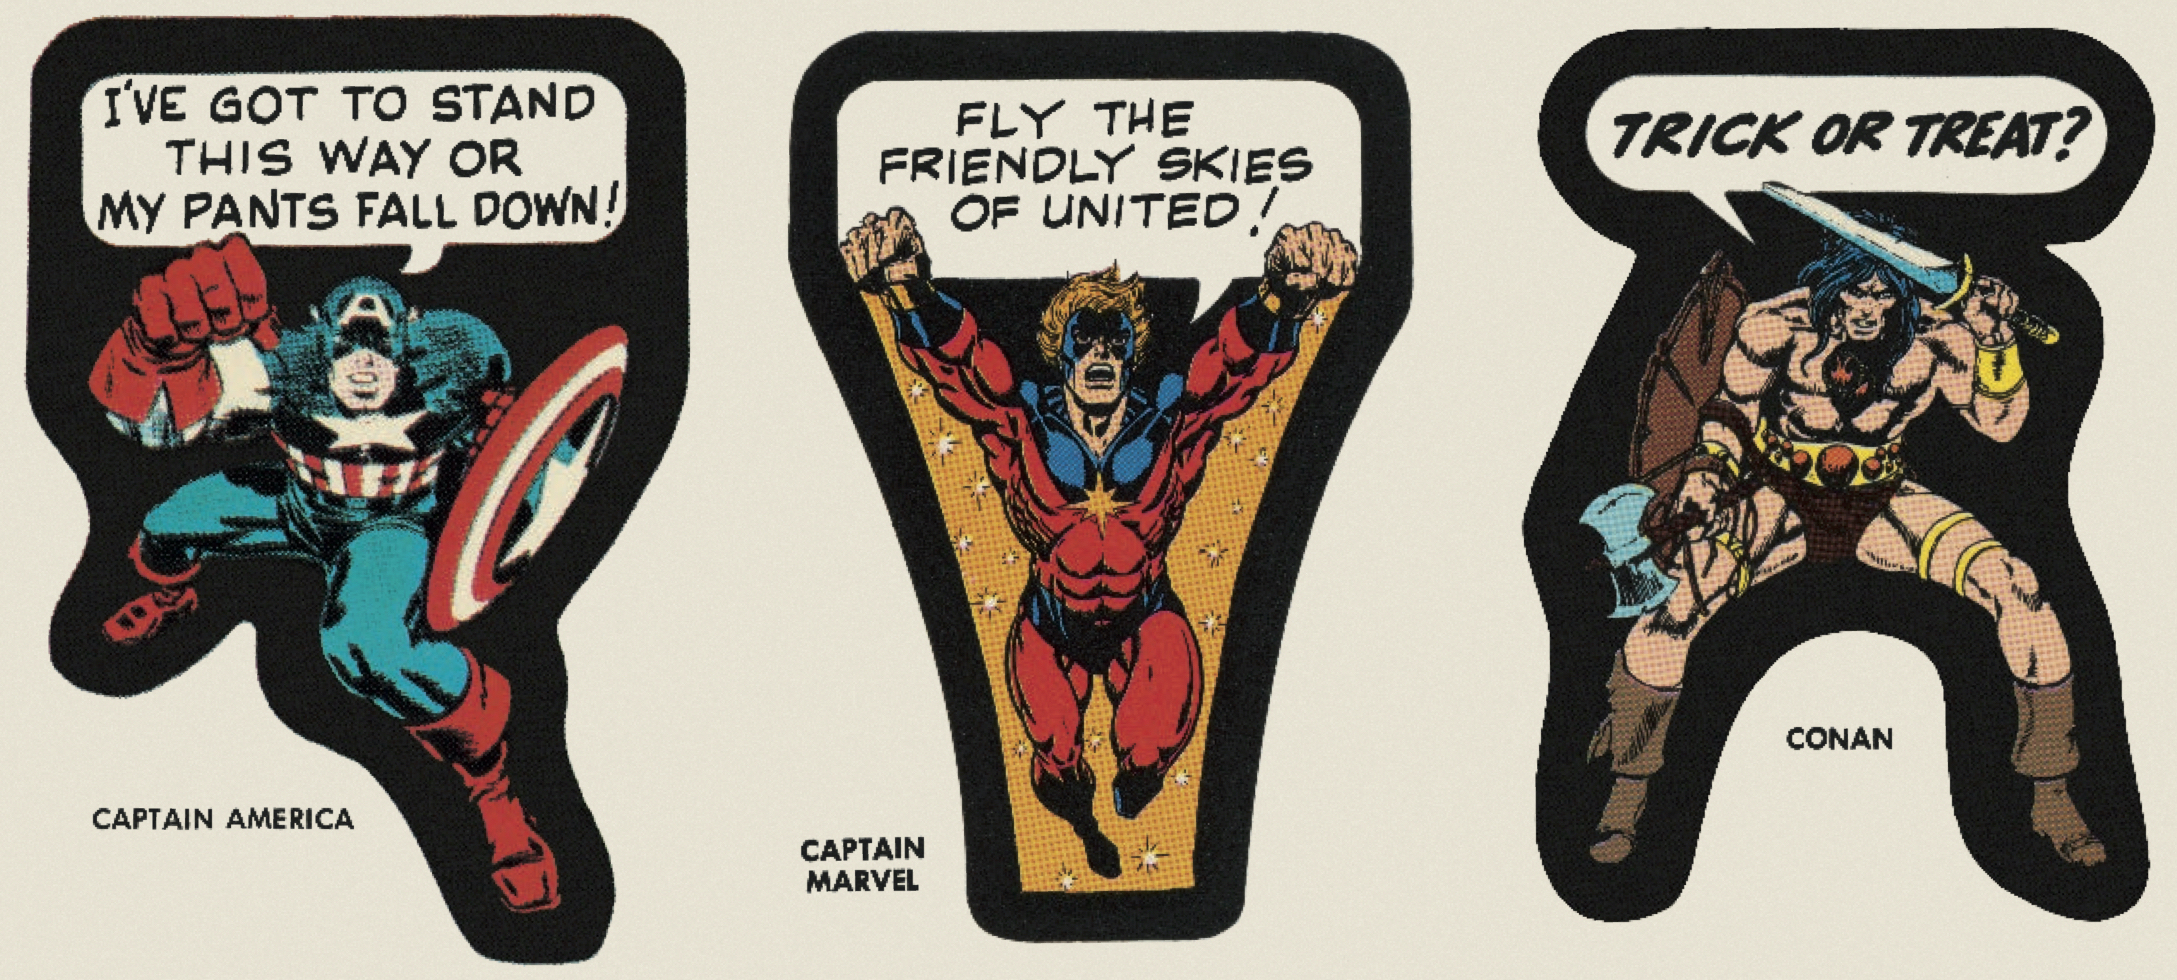 FAR OUT! MARVEL Reprints Classic Vintage Stickers From '60s and